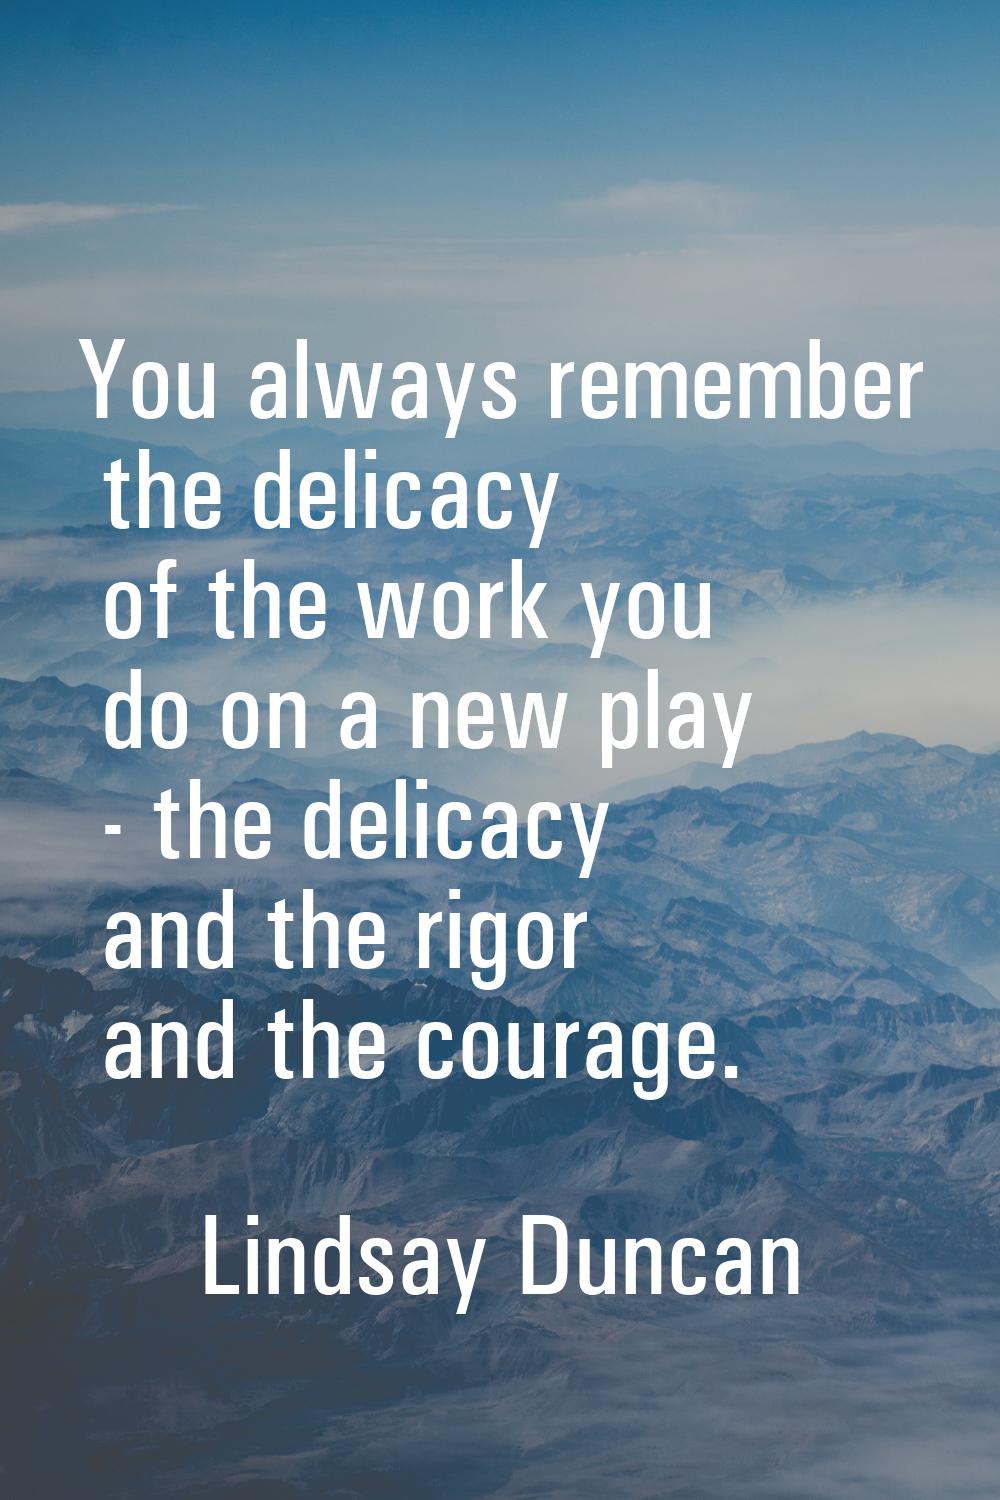 You always remember the delicacy of the work you do on a new play - the delicacy and the rigor and 